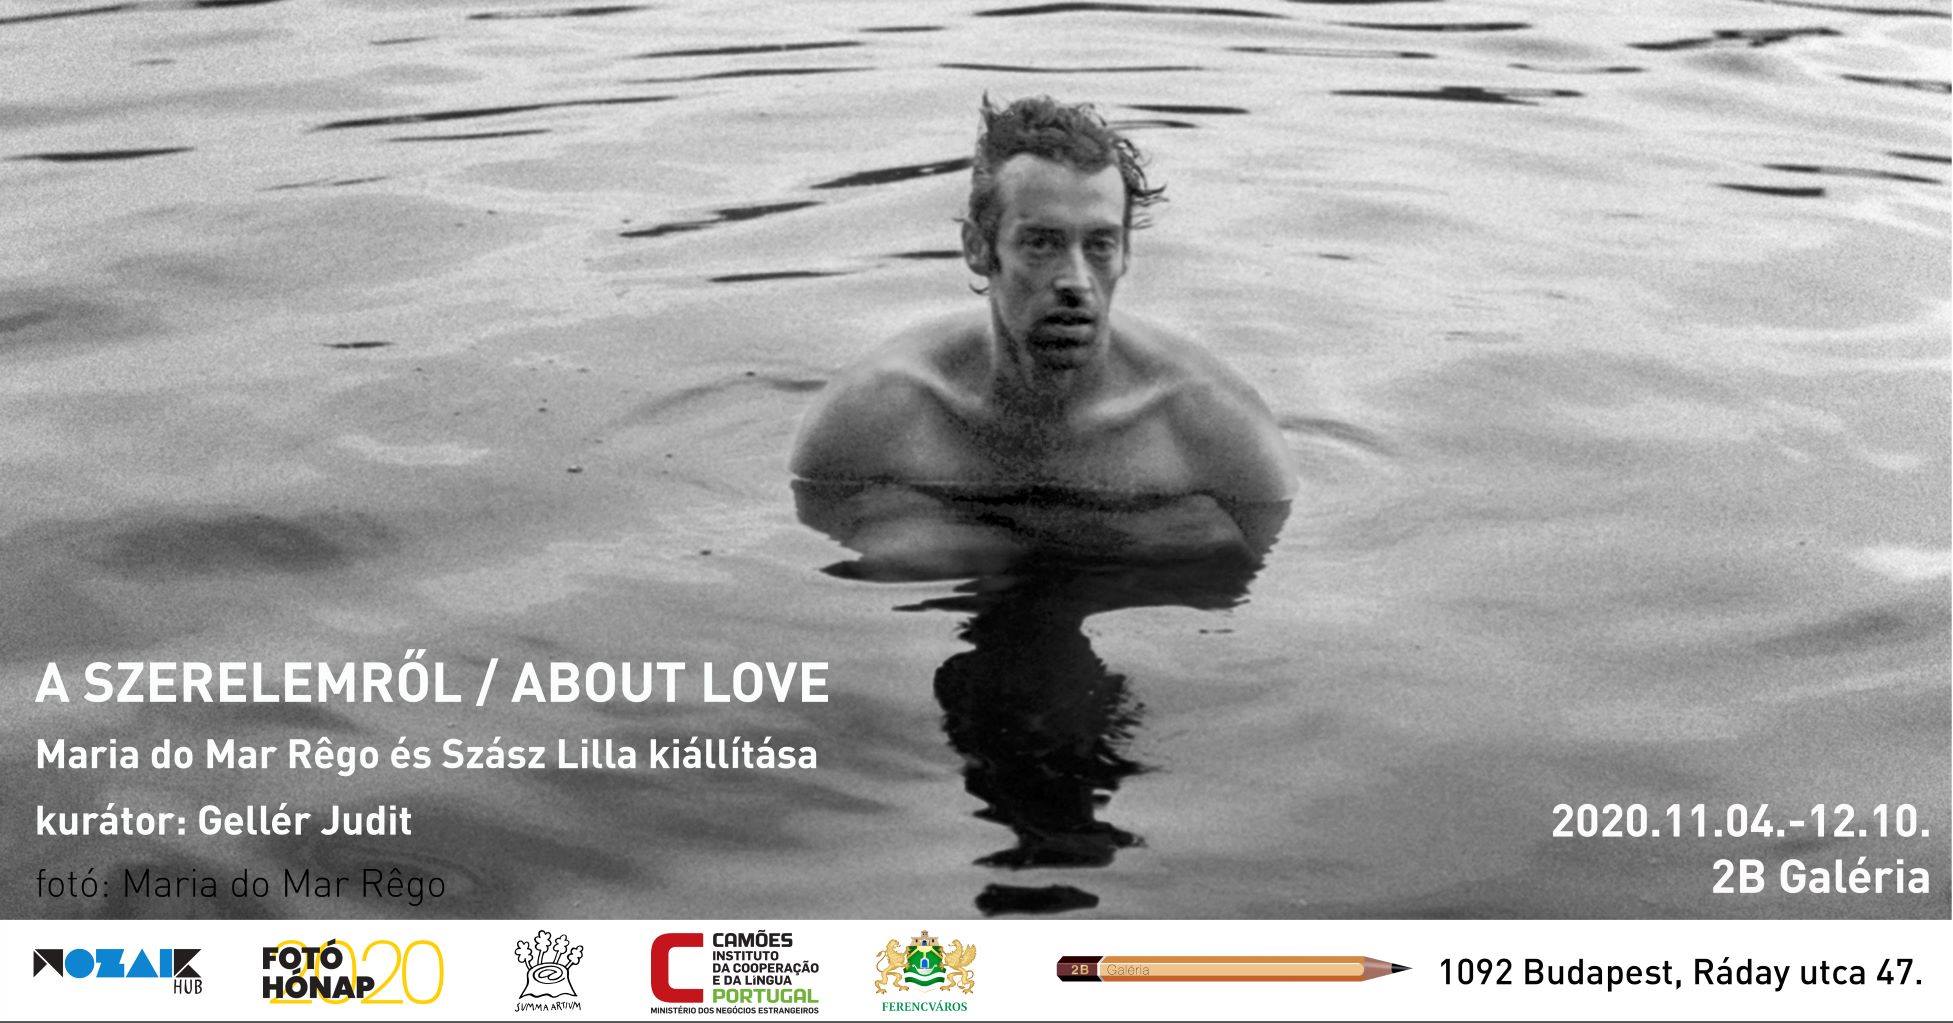 'About Love' Photo Exhibition @ 2B Gallery Budapest